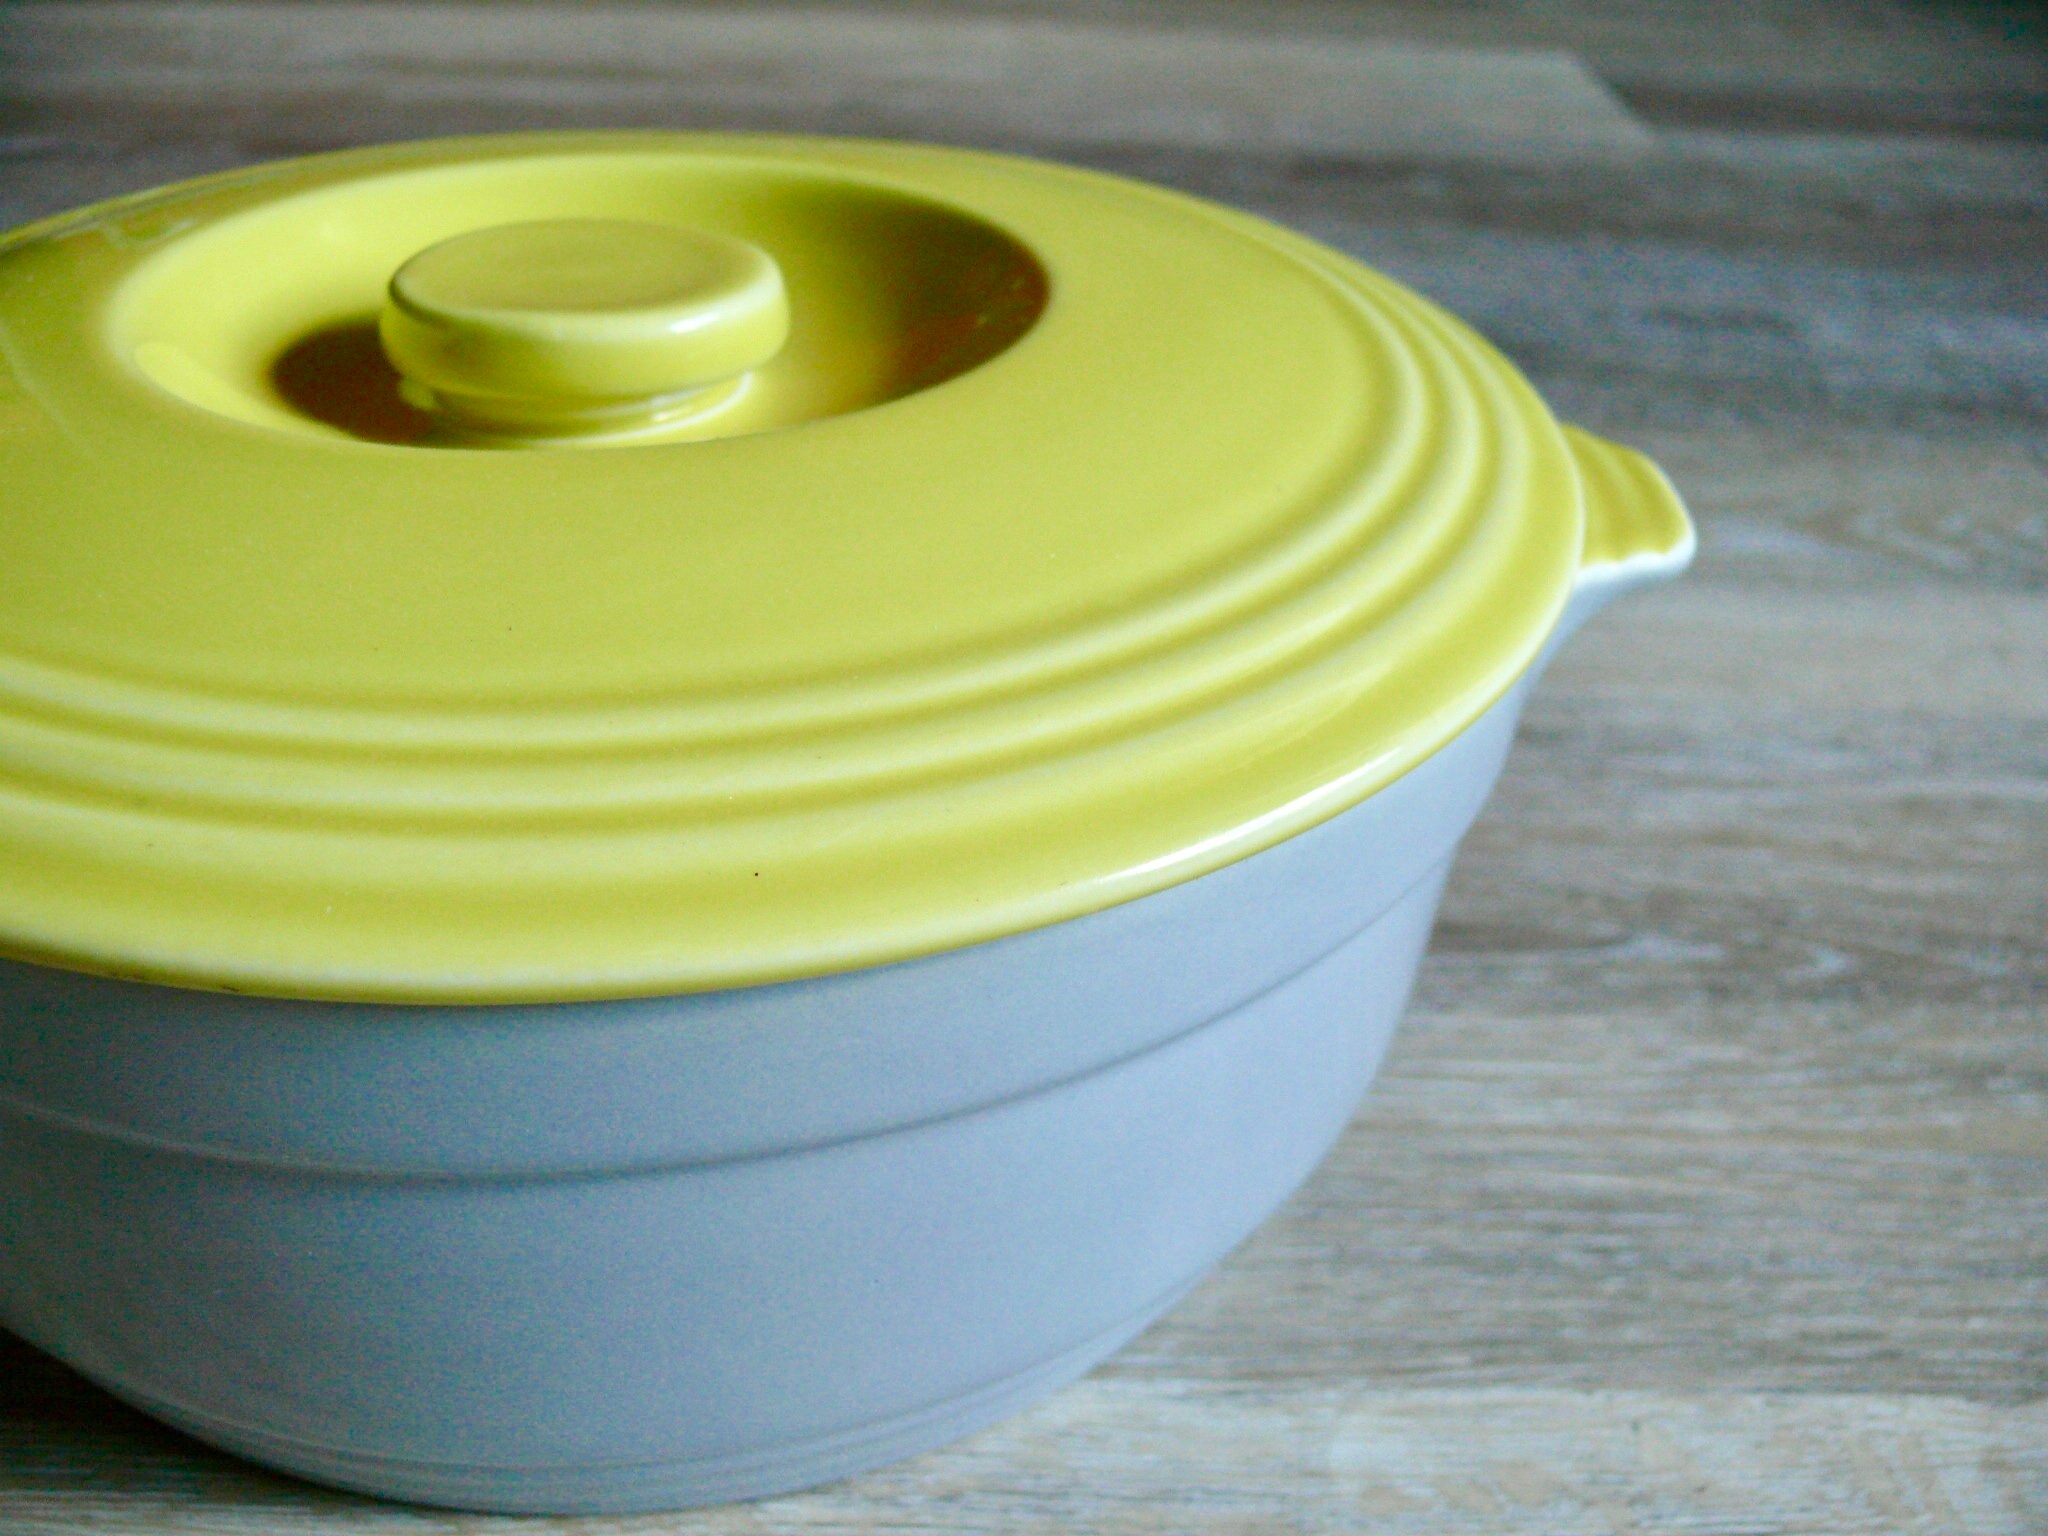 Vintage General Electric Gray and Yellow Refrigerator Dish 